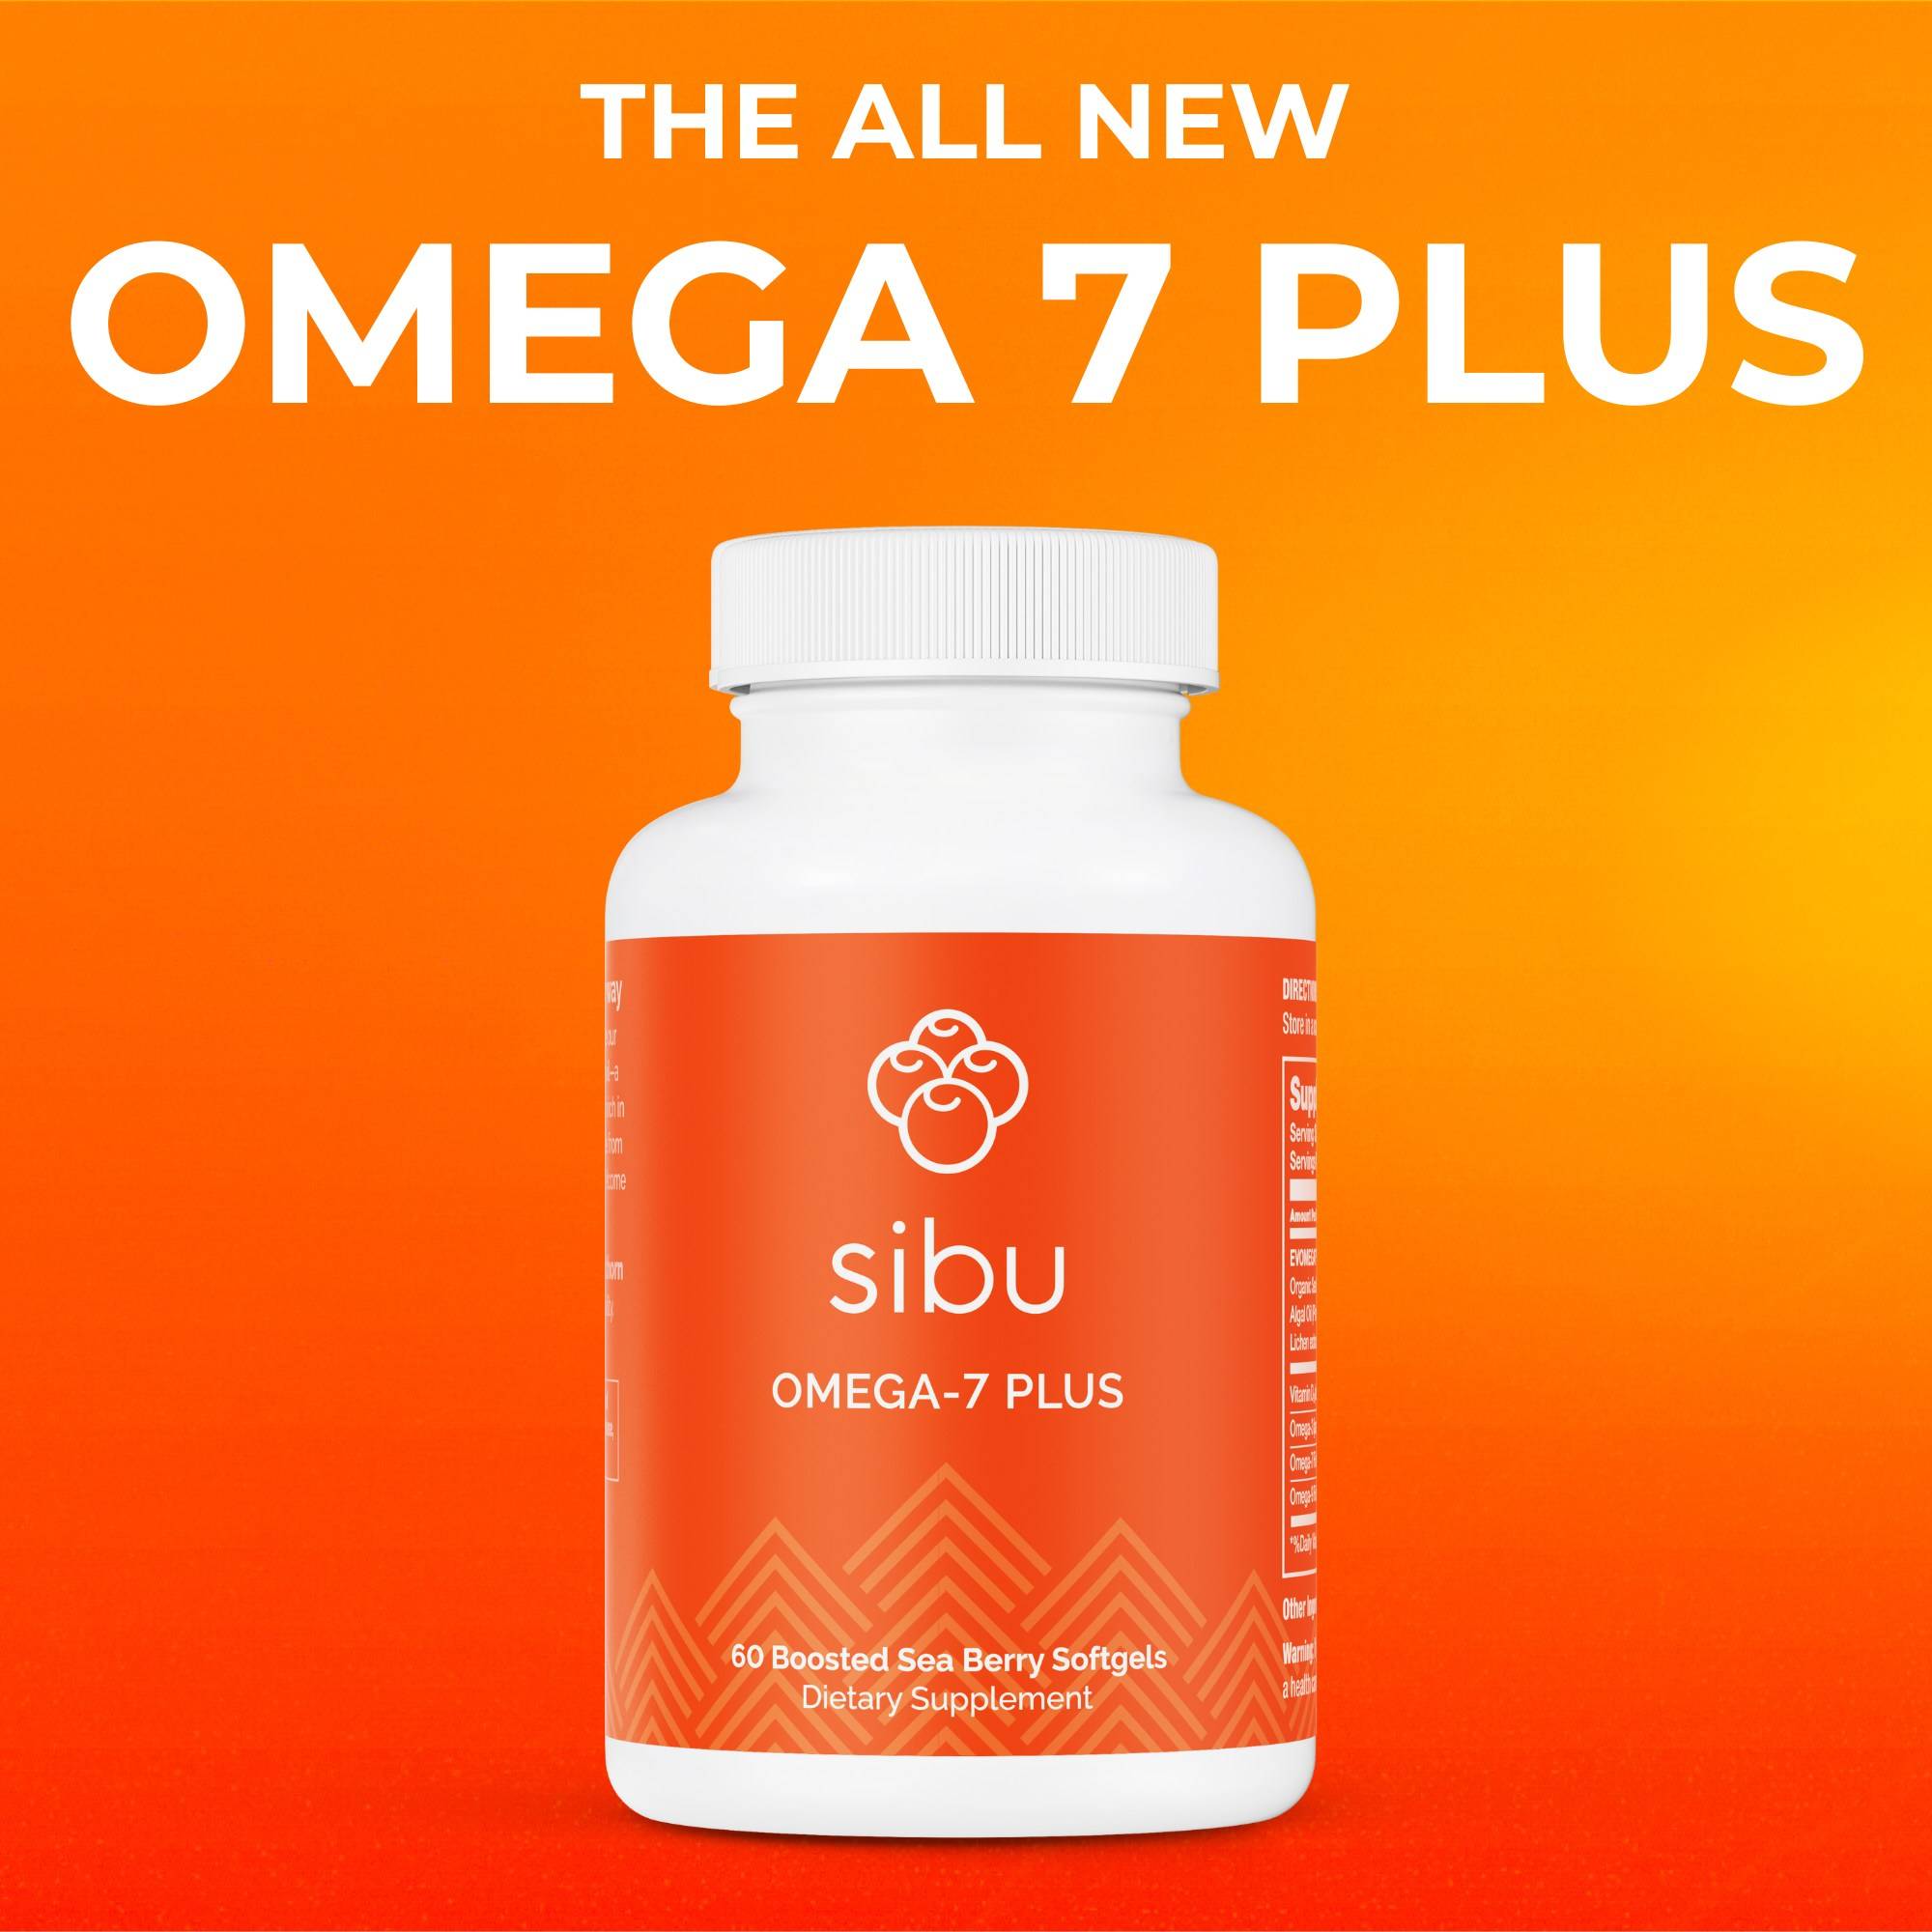 The All New Omega 7 Plus